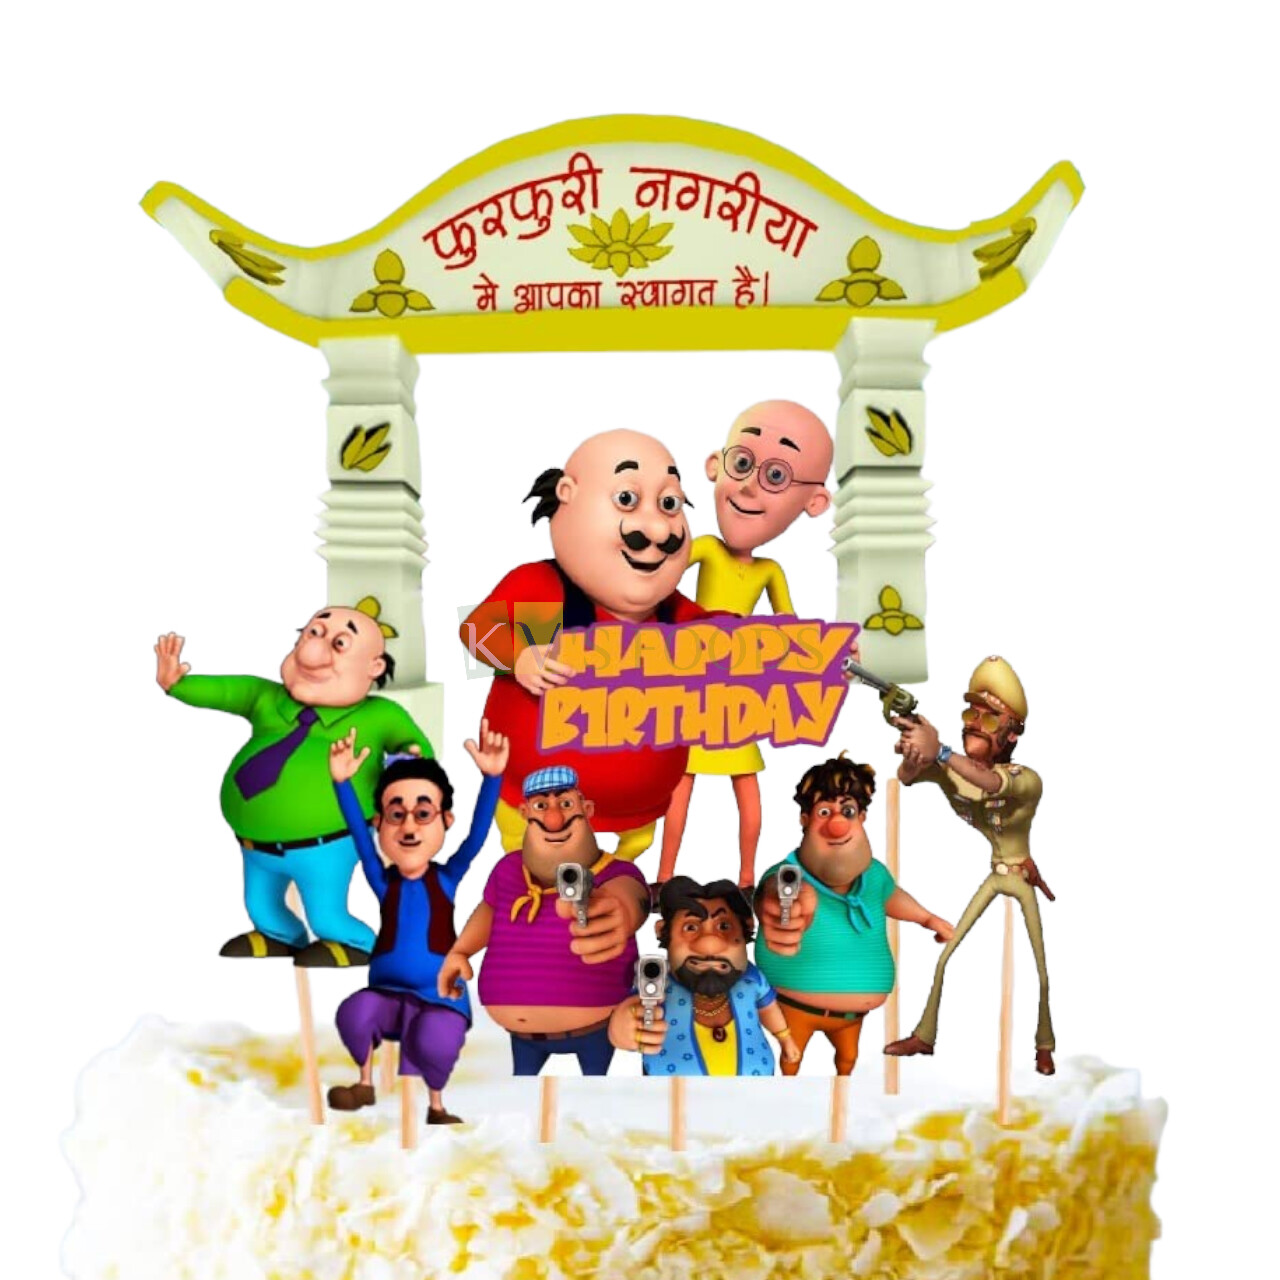 6 PC Motu Patlu Cartoon Theme, Home Cake Topper Insert, Cake Topper, Cupcake Toppers Bday, 1st, 2nd, 3rd, 4th Bday Decorations Items/Cake Accessories, Tags, Cards, Cake Toothpick Topper